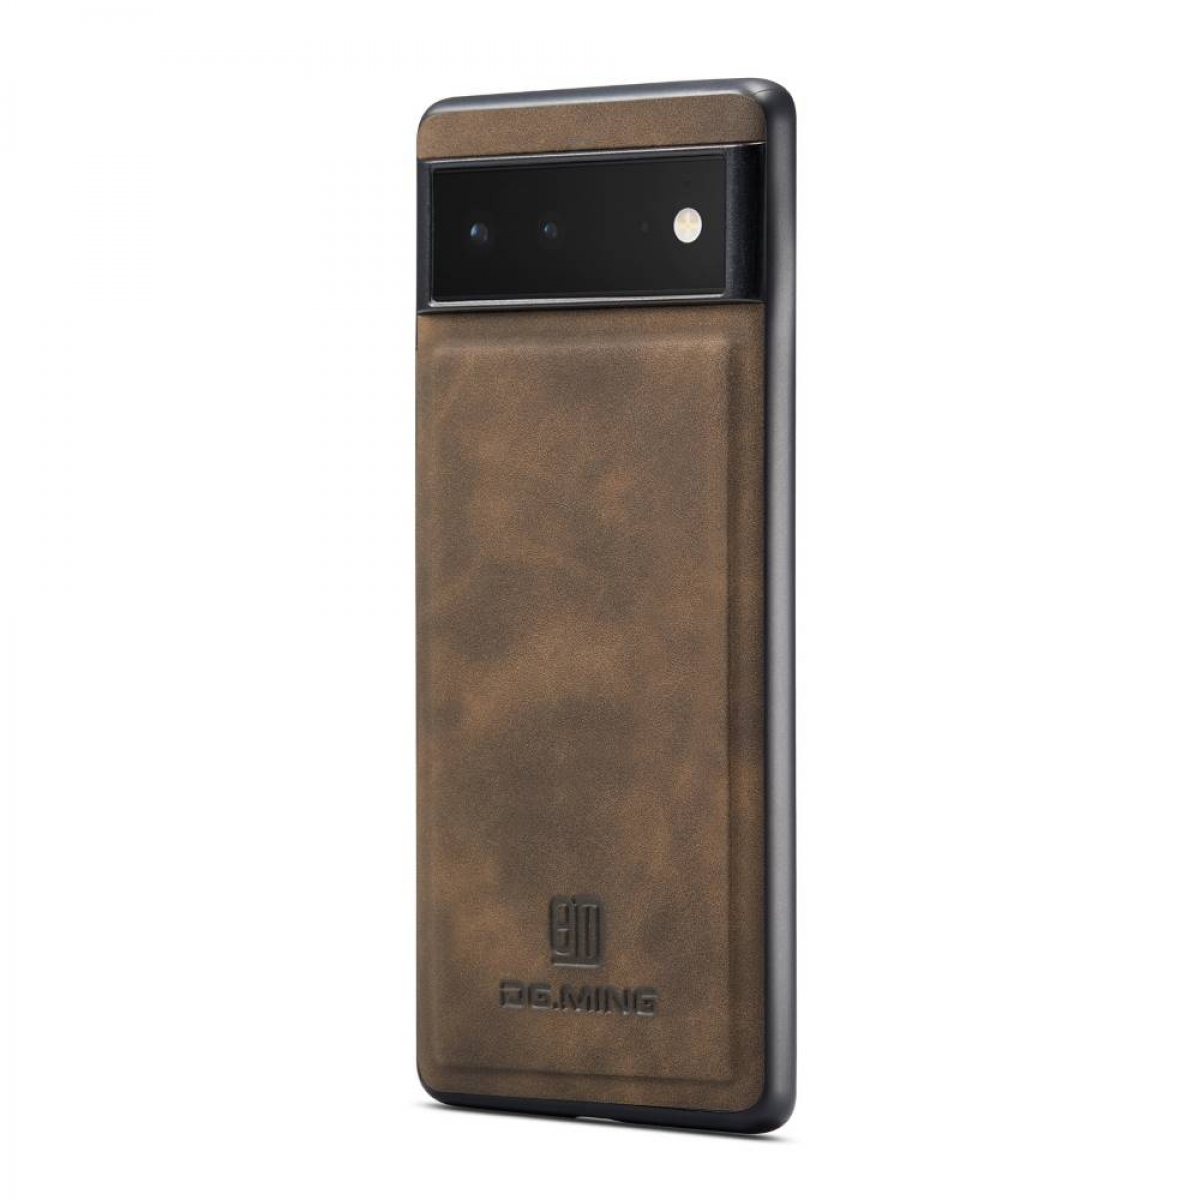 DG MING M2 2in1, Backcover, Pixel Coffee 6, Google